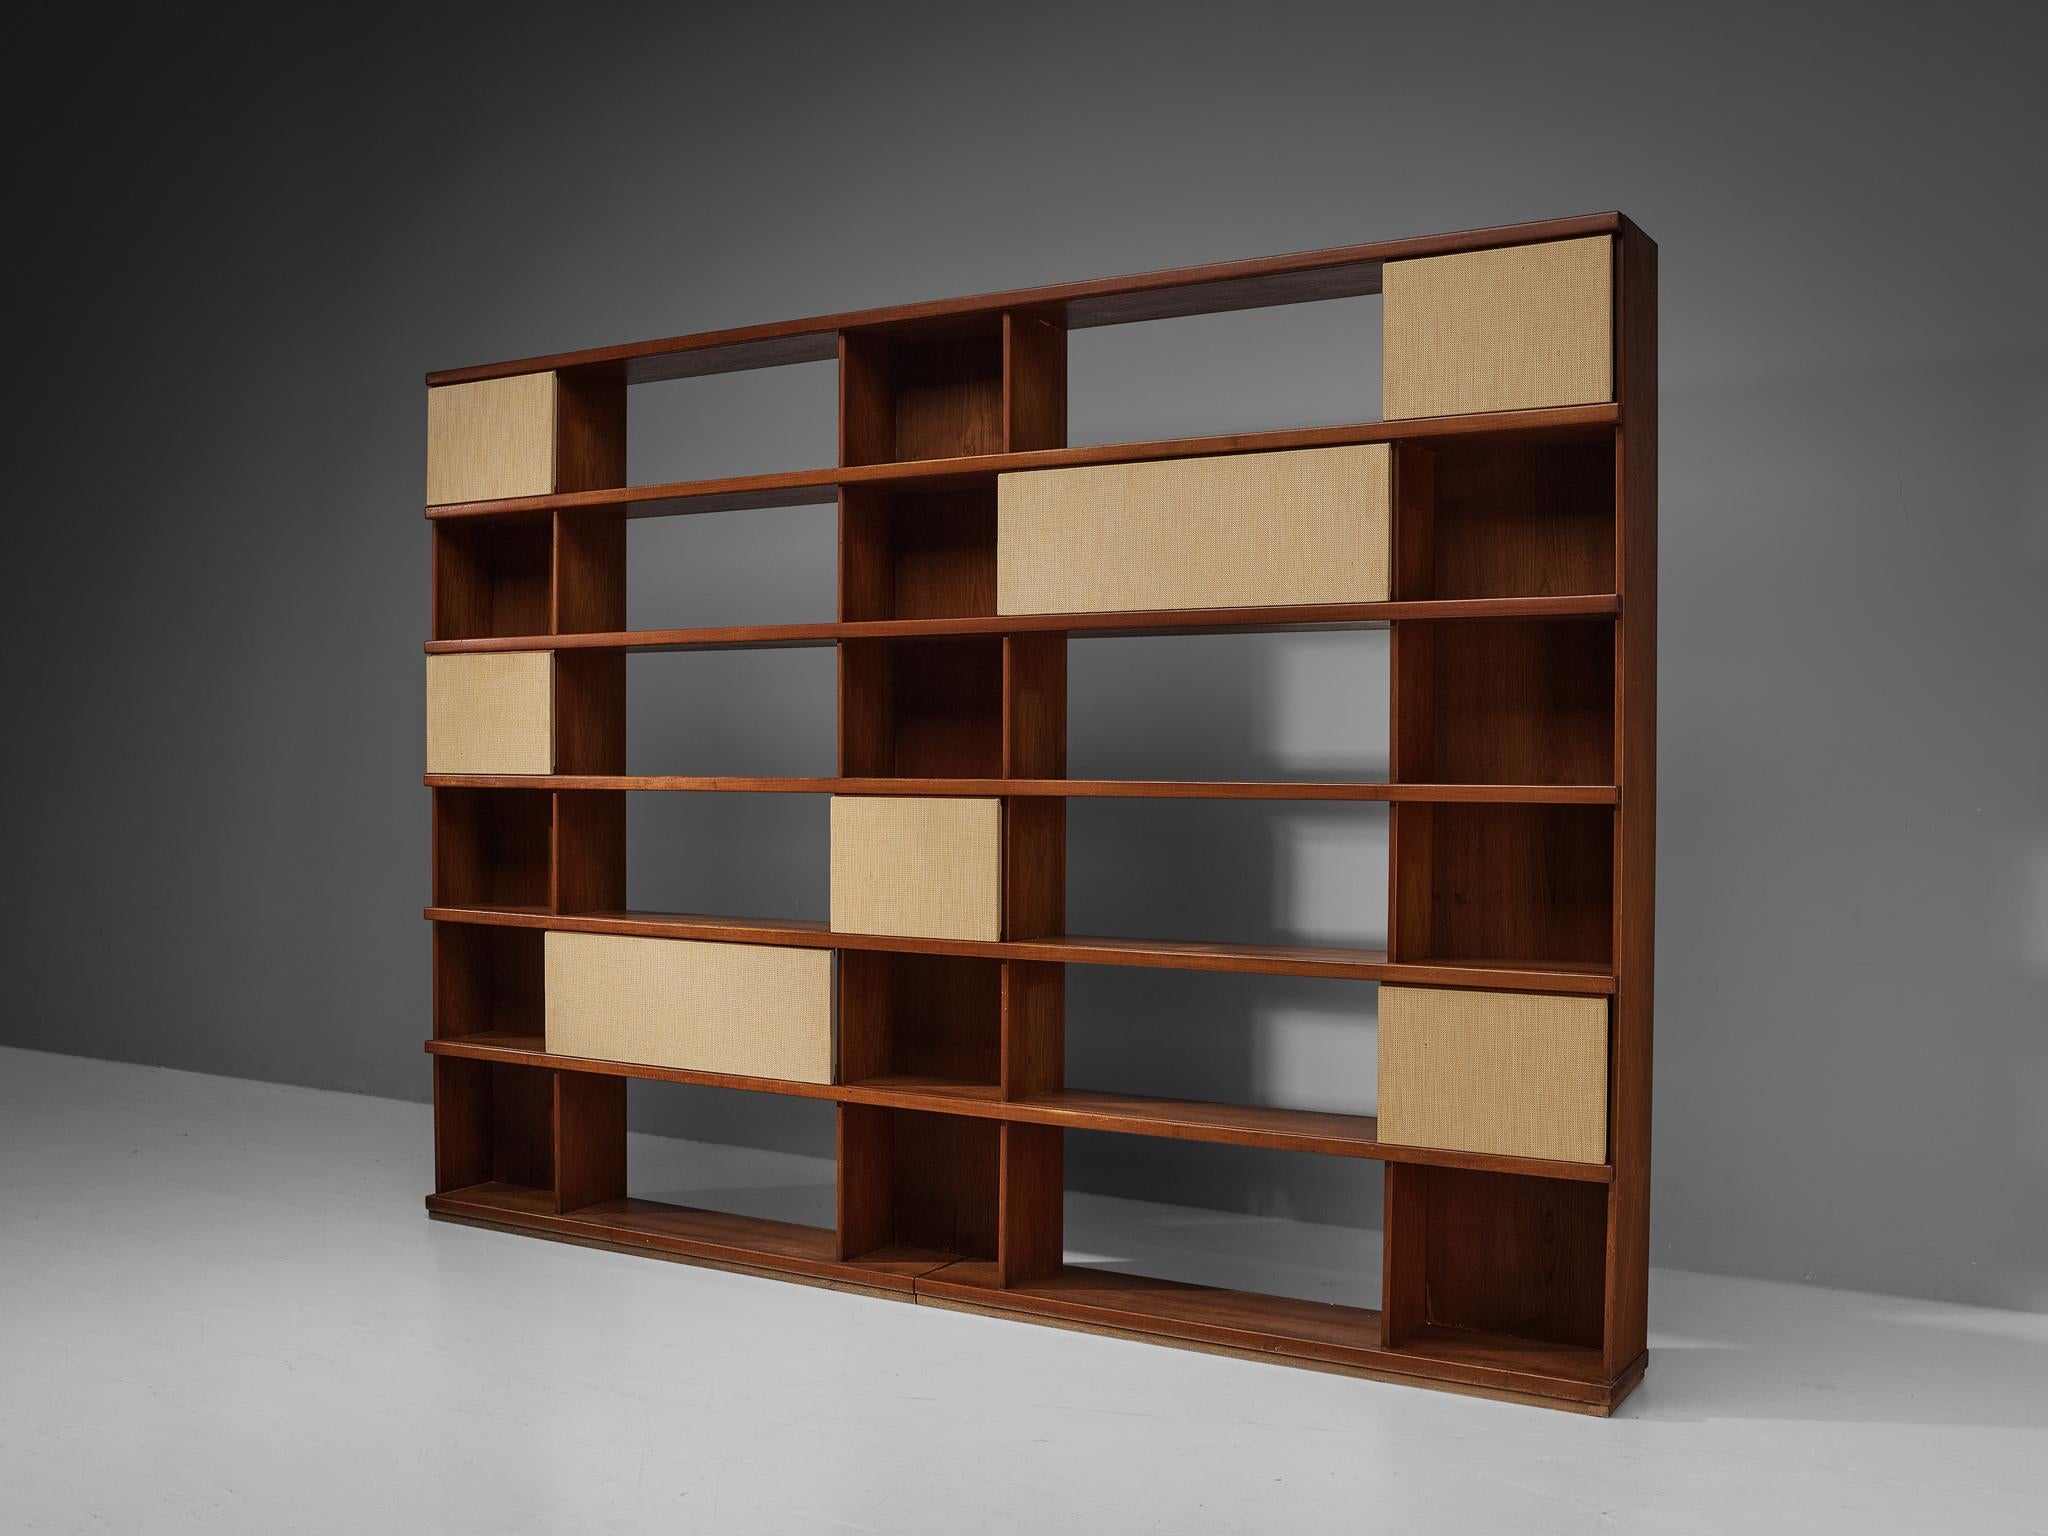 IImari Tapiovaara for La Permanente Mobili Cantù, bookcase, teak, fabric, Italy, circa 1957

This grand bookcase executed in teak is designed by the Finnish designer Ilmari Tapiovaara. The clean lines allow you to showcase your special belongings in